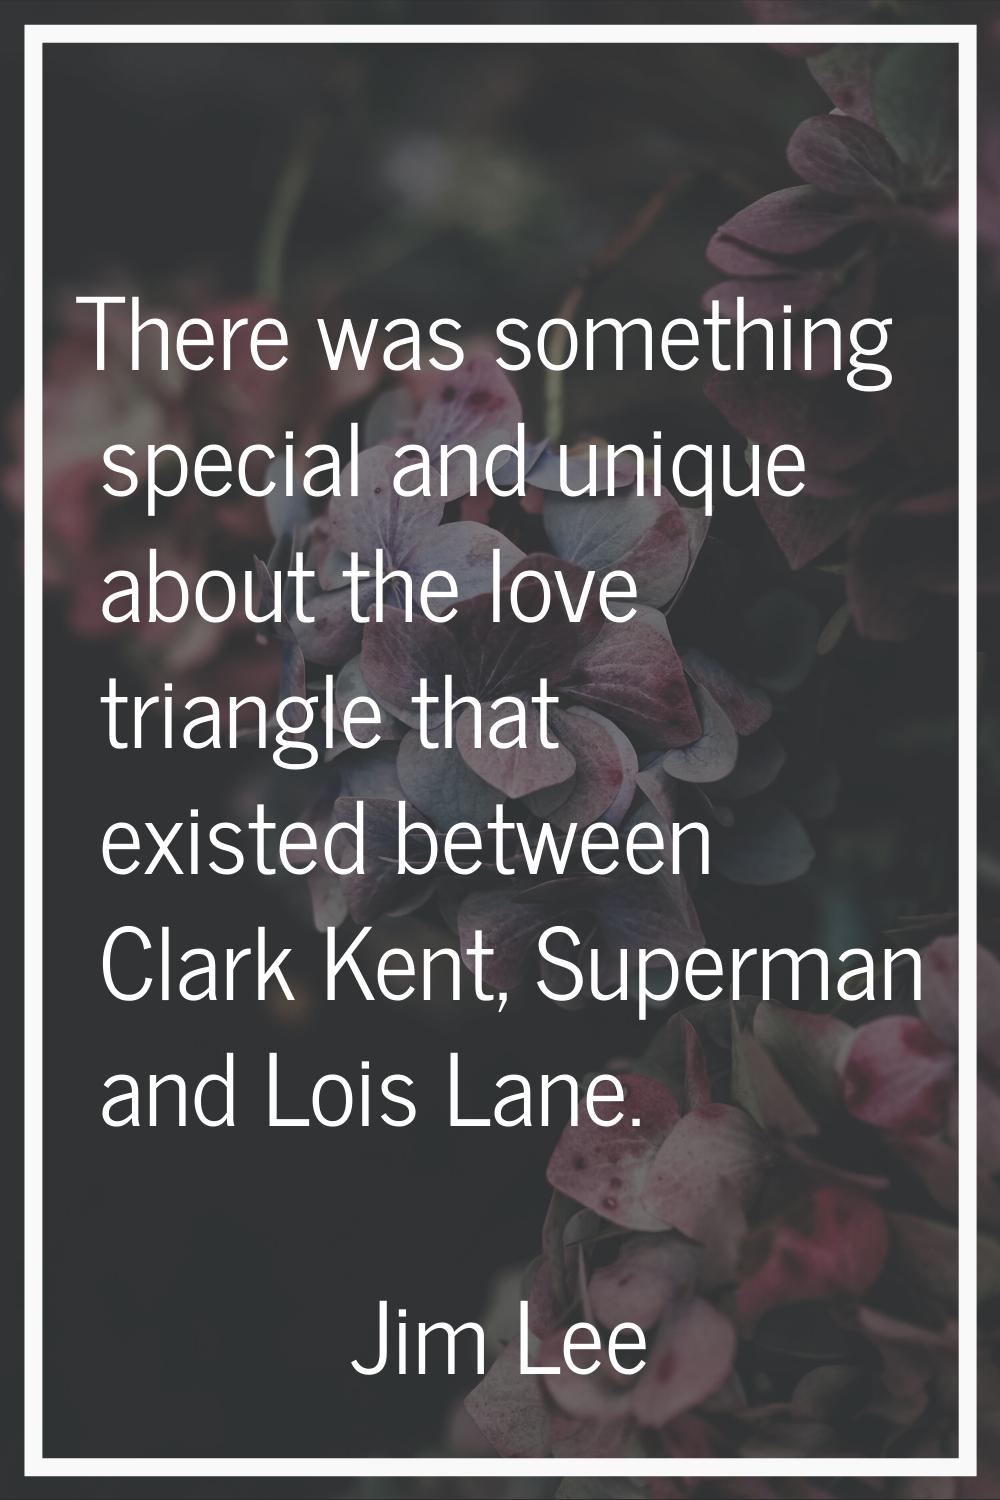 There was something special and unique about the love triangle that existed between Clark Kent, Sup